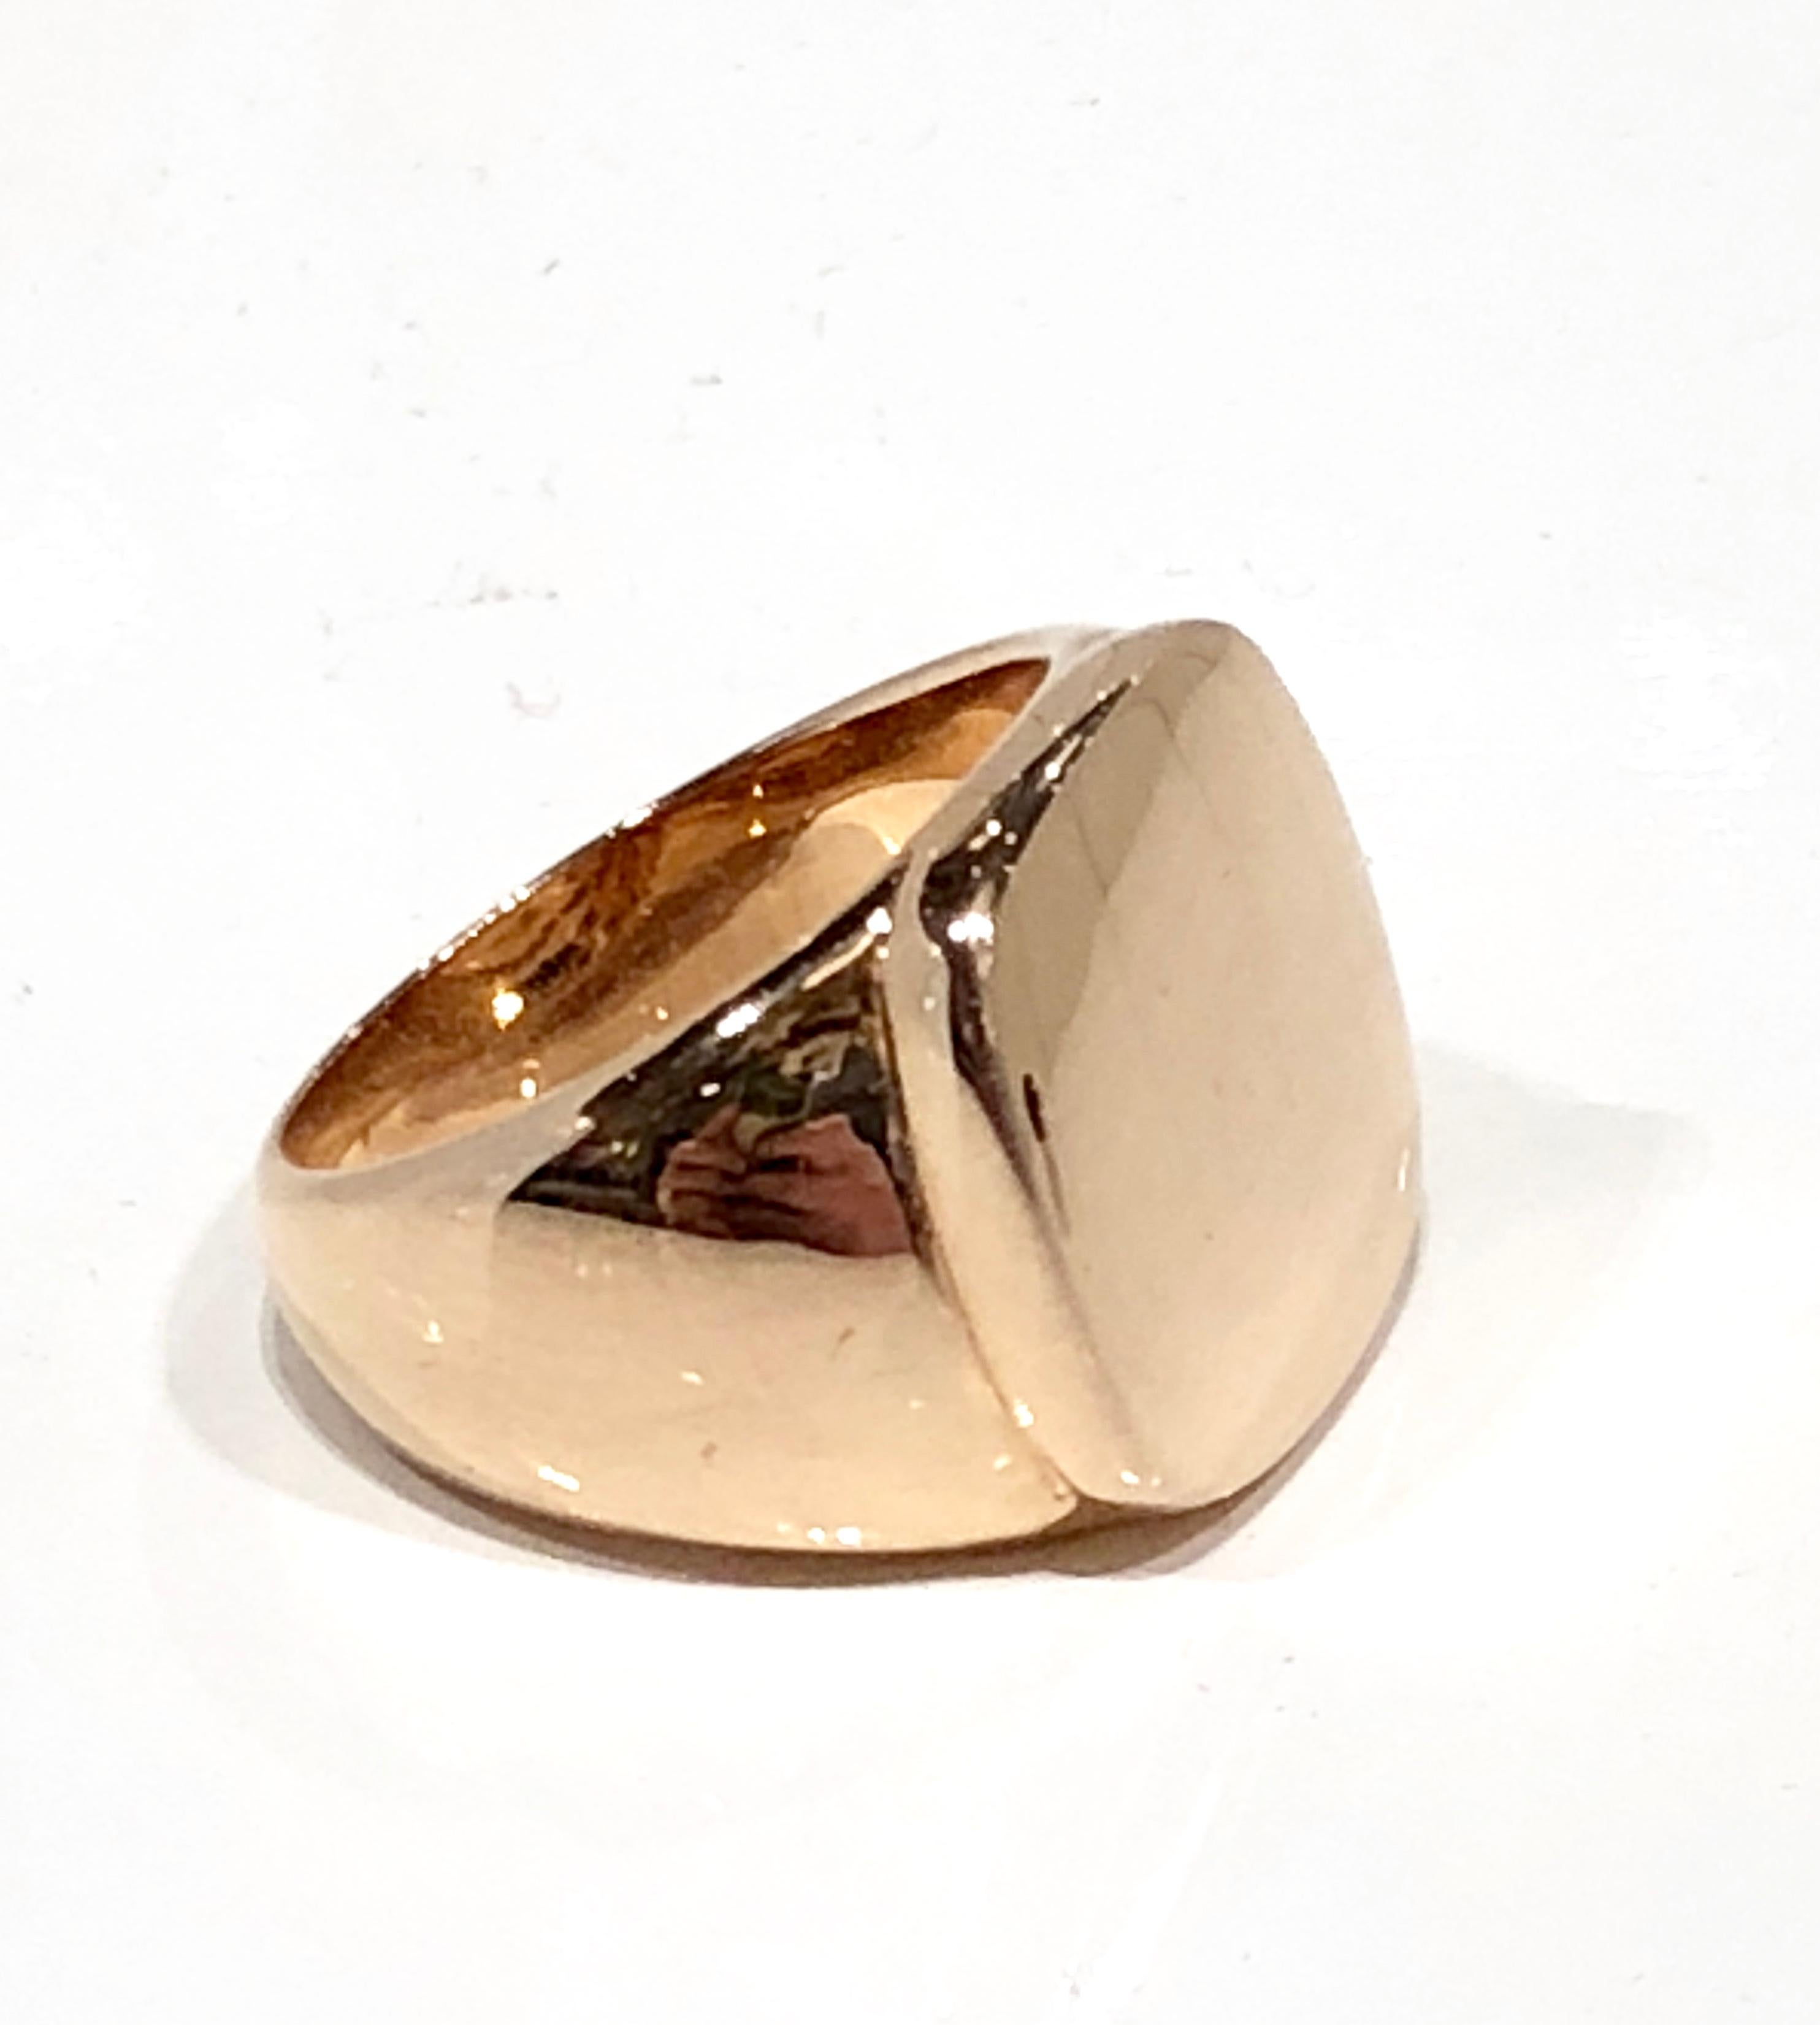 Unisex 18k rose gold square Signet ring, perfect for engraving
Designed by Martyn Lawrence Bullard
Can be made in any size in white, yellow or rose 18 k gold, lead time 4 weeks